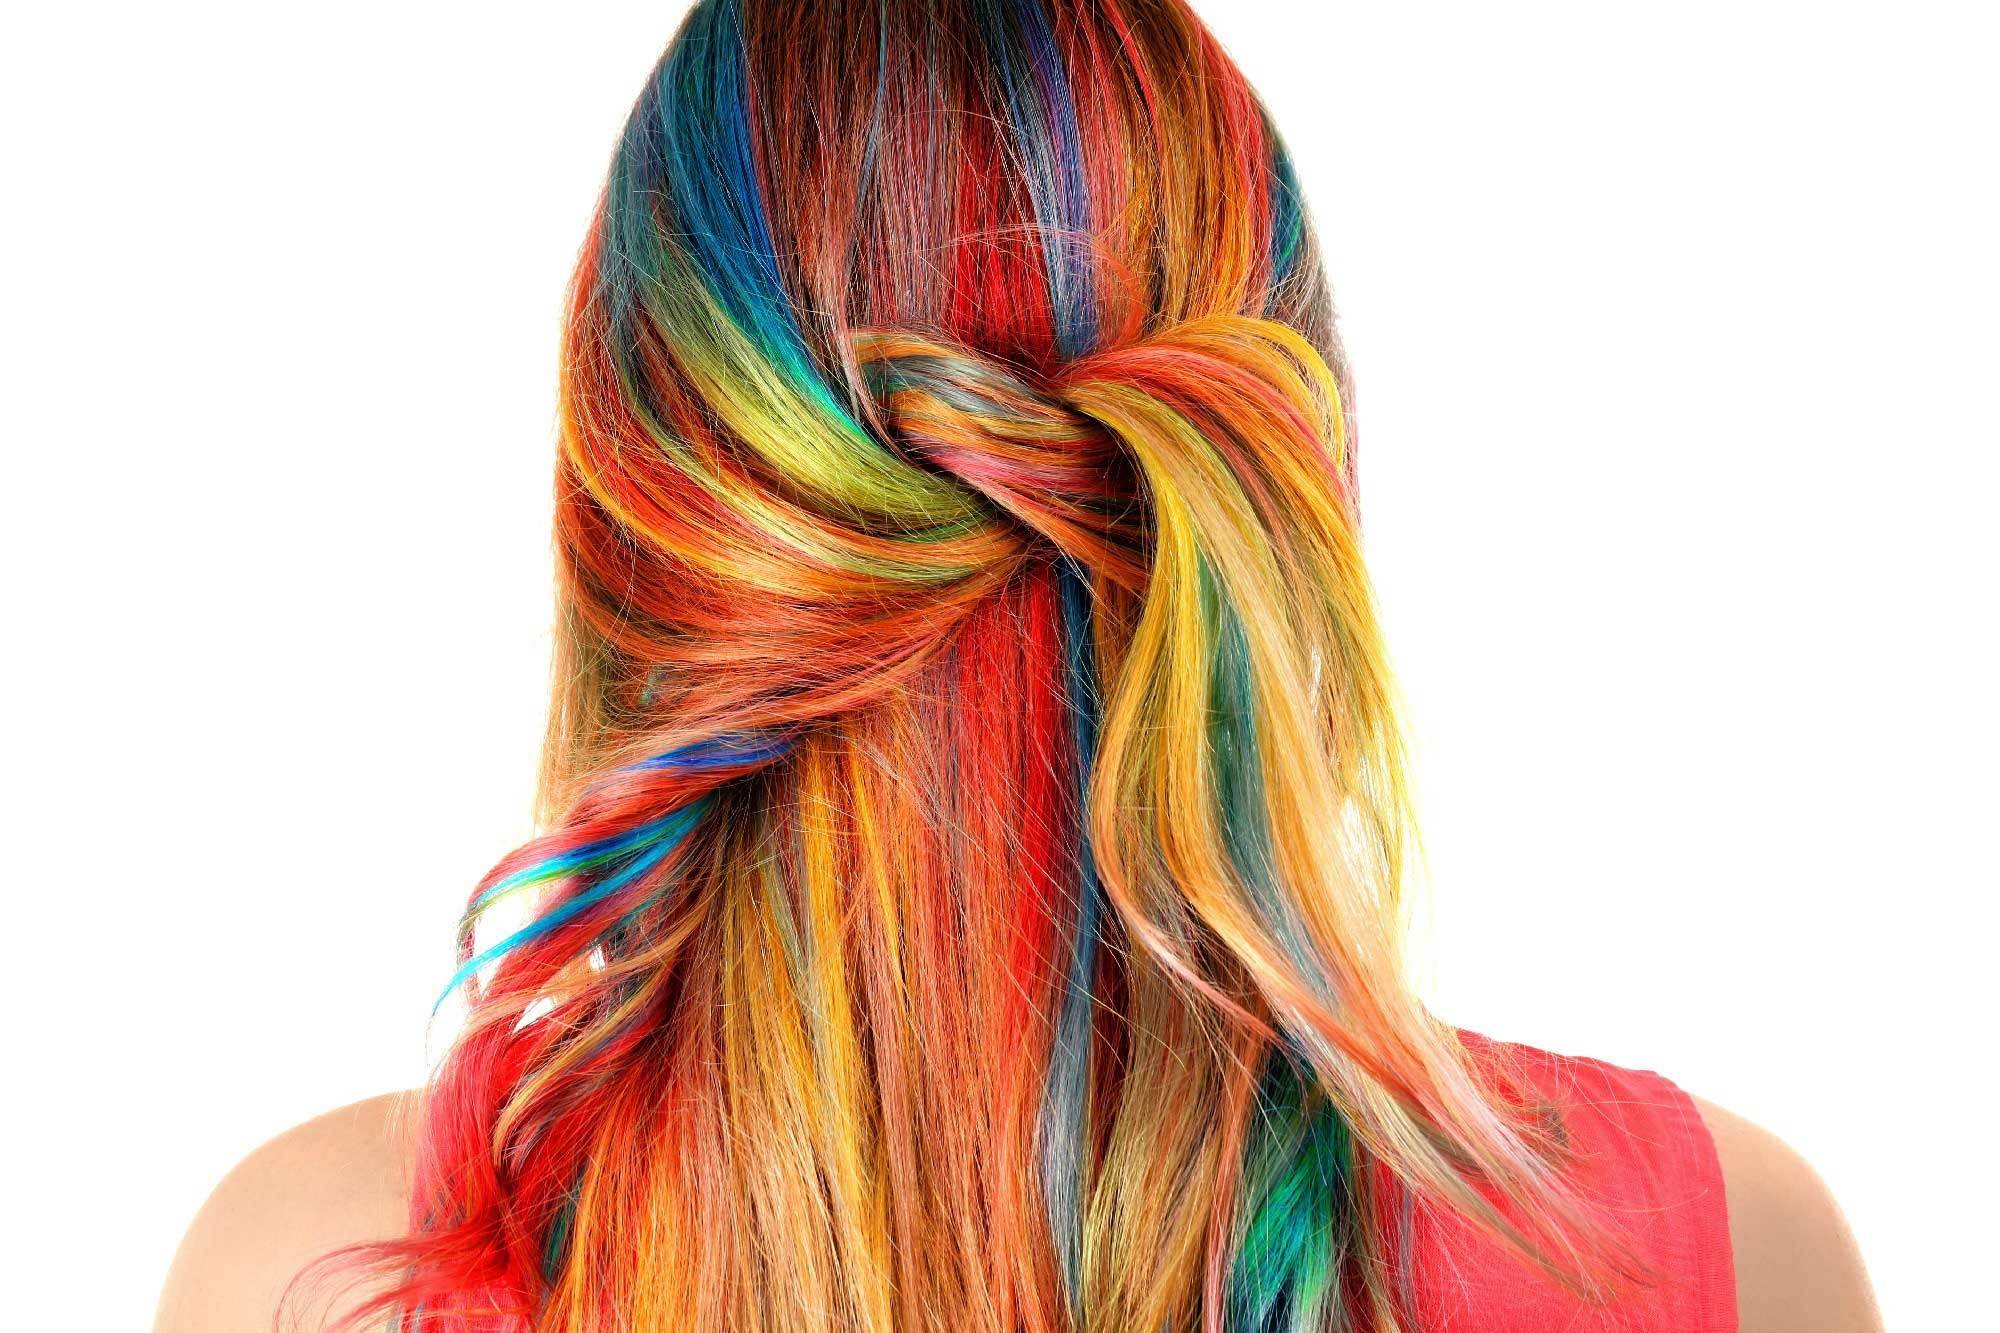 woman with colourful long hair in a twist hairstyle